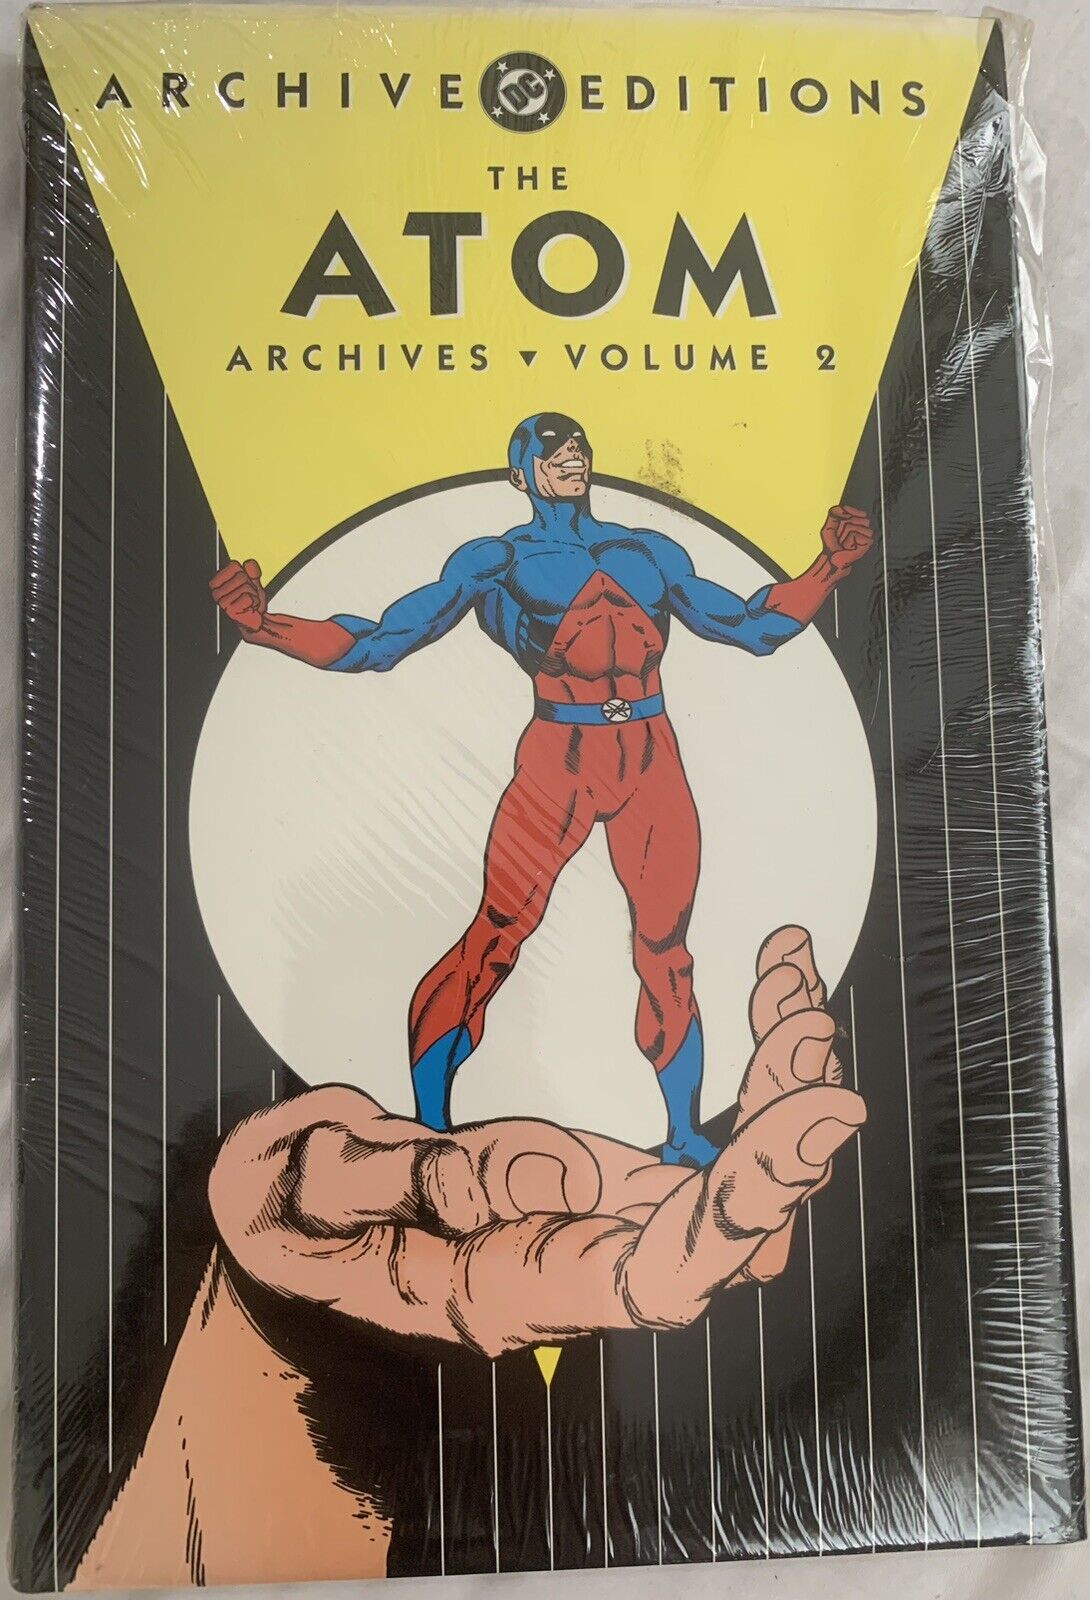 THE ATOM : ARCHIVE EDITIONS VOLUME 2 THE ATOM # 6-13, 1963-1964 NOS Factory Seal